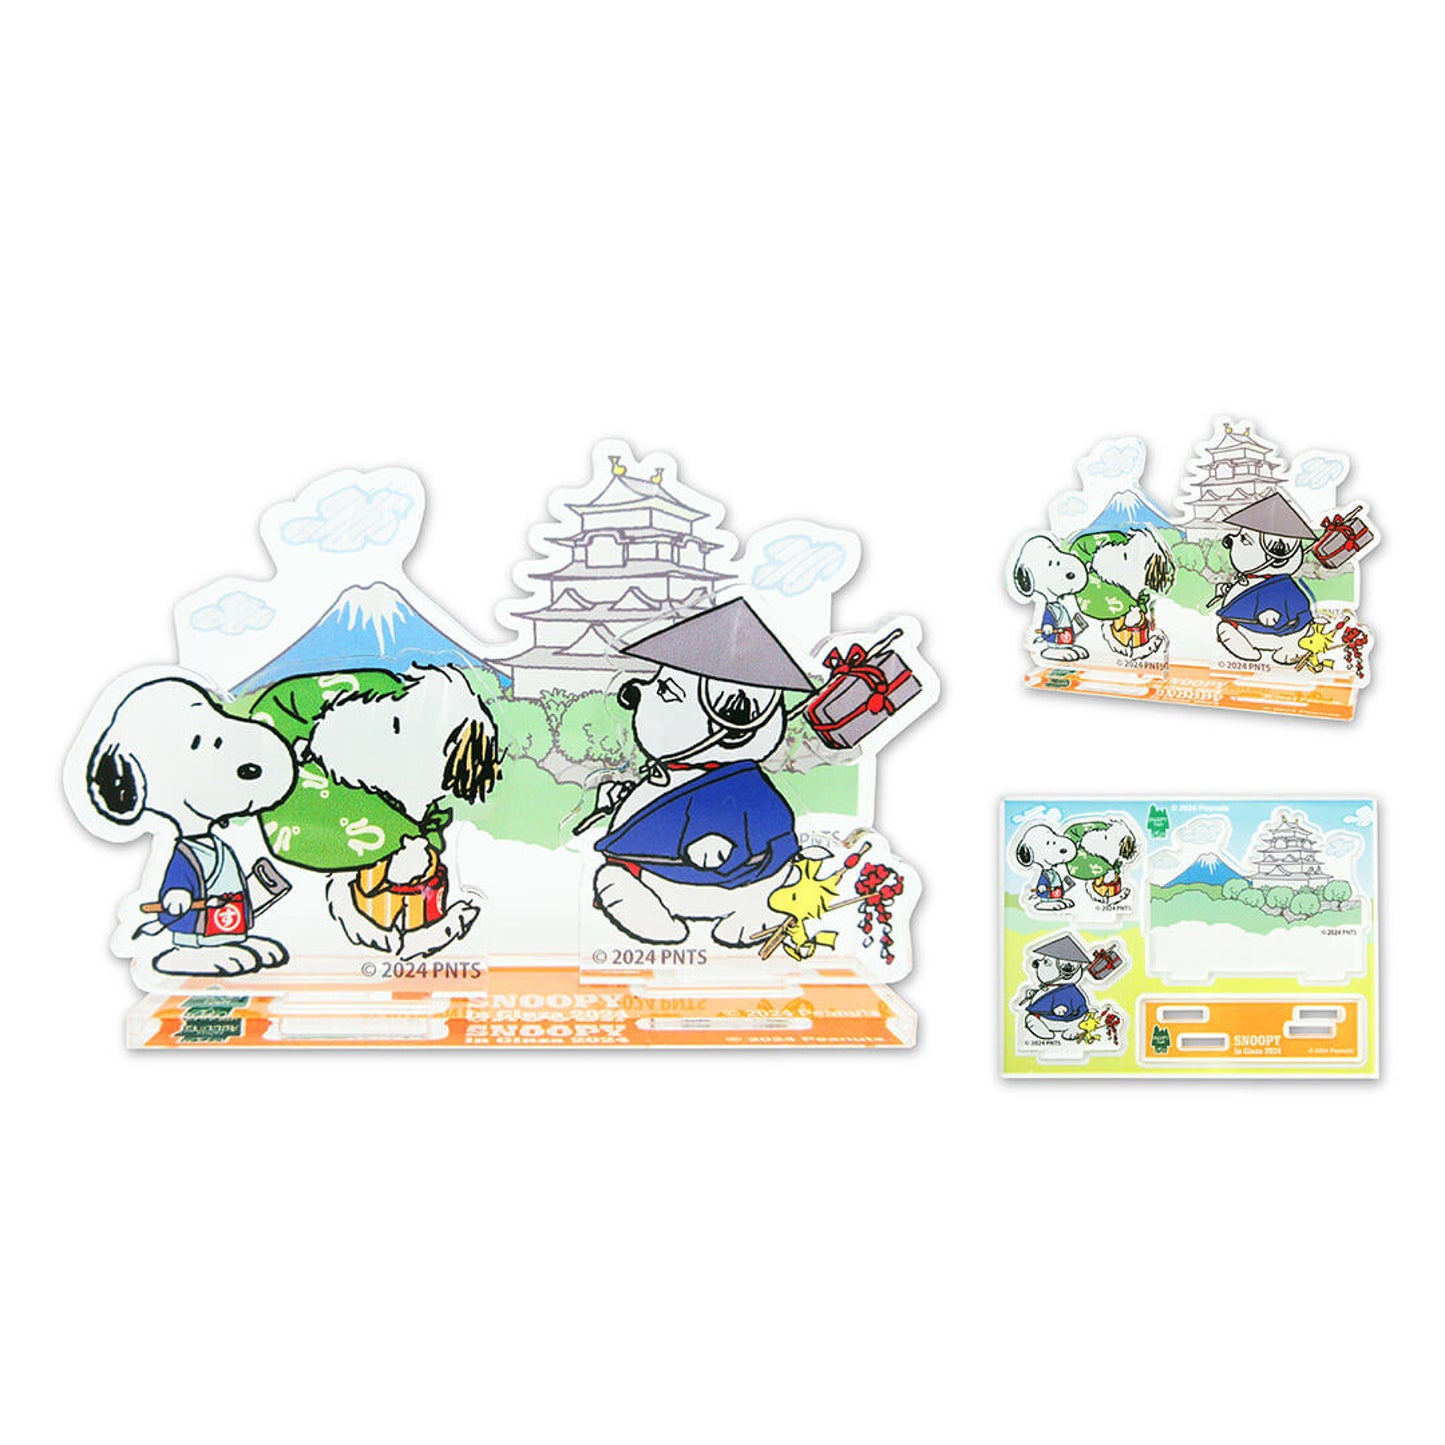 【Pre-order】Snoopy in Ginza Exhibition Japanese Style Series-Stationery